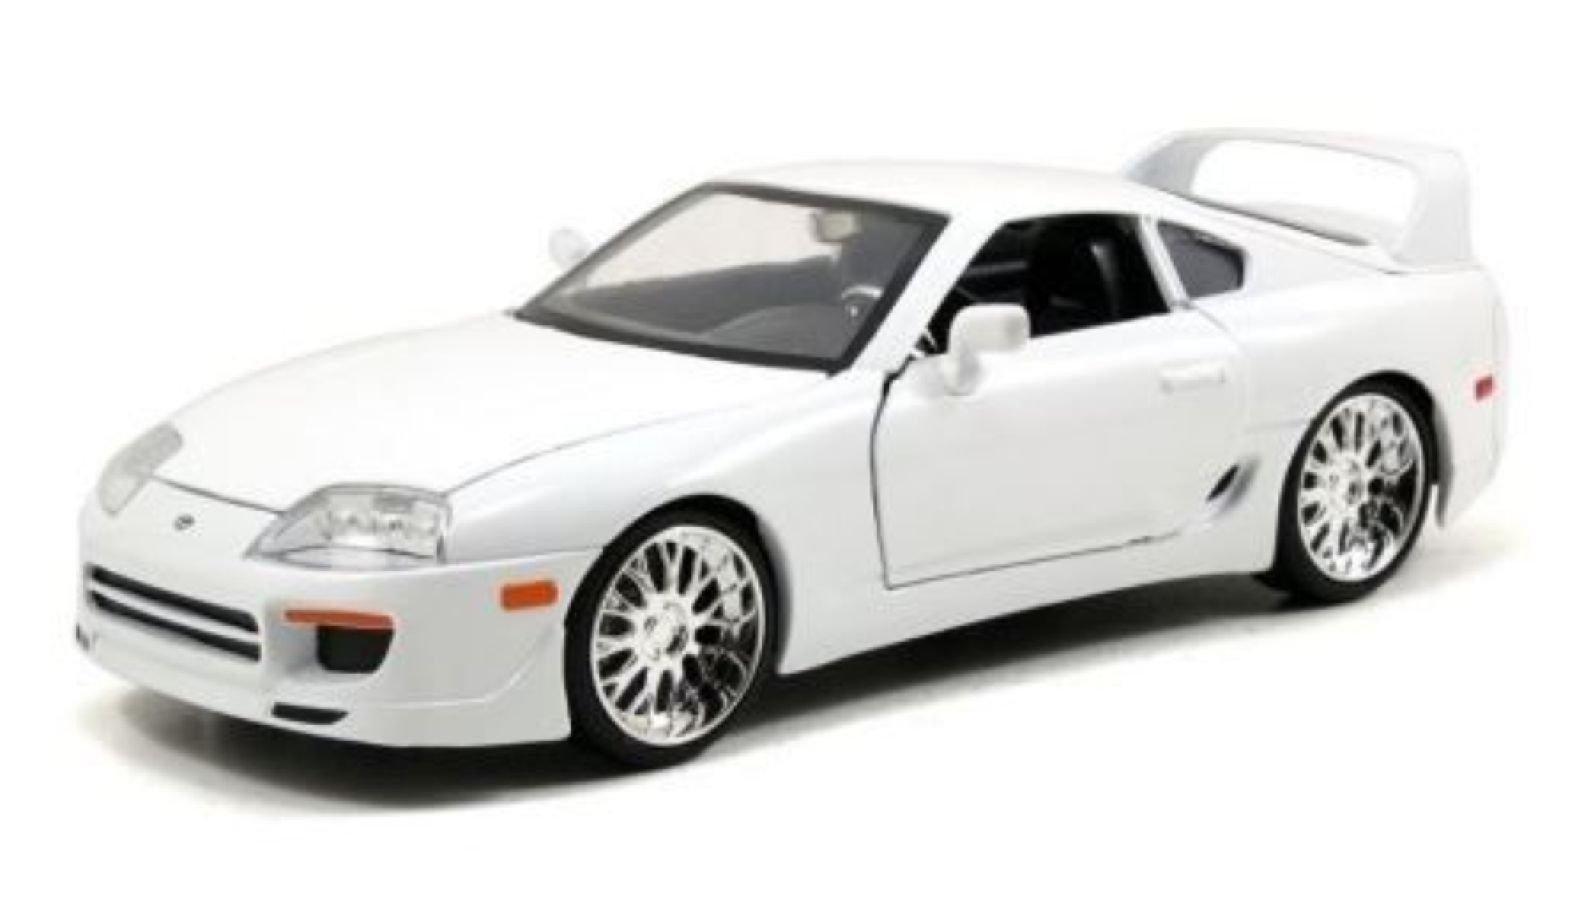 JAD97375 Fast and Furious - '95 Toyota Supra WH 1:24 Scale Hollywood Ride - Jada Toys - Titan Pop Culture